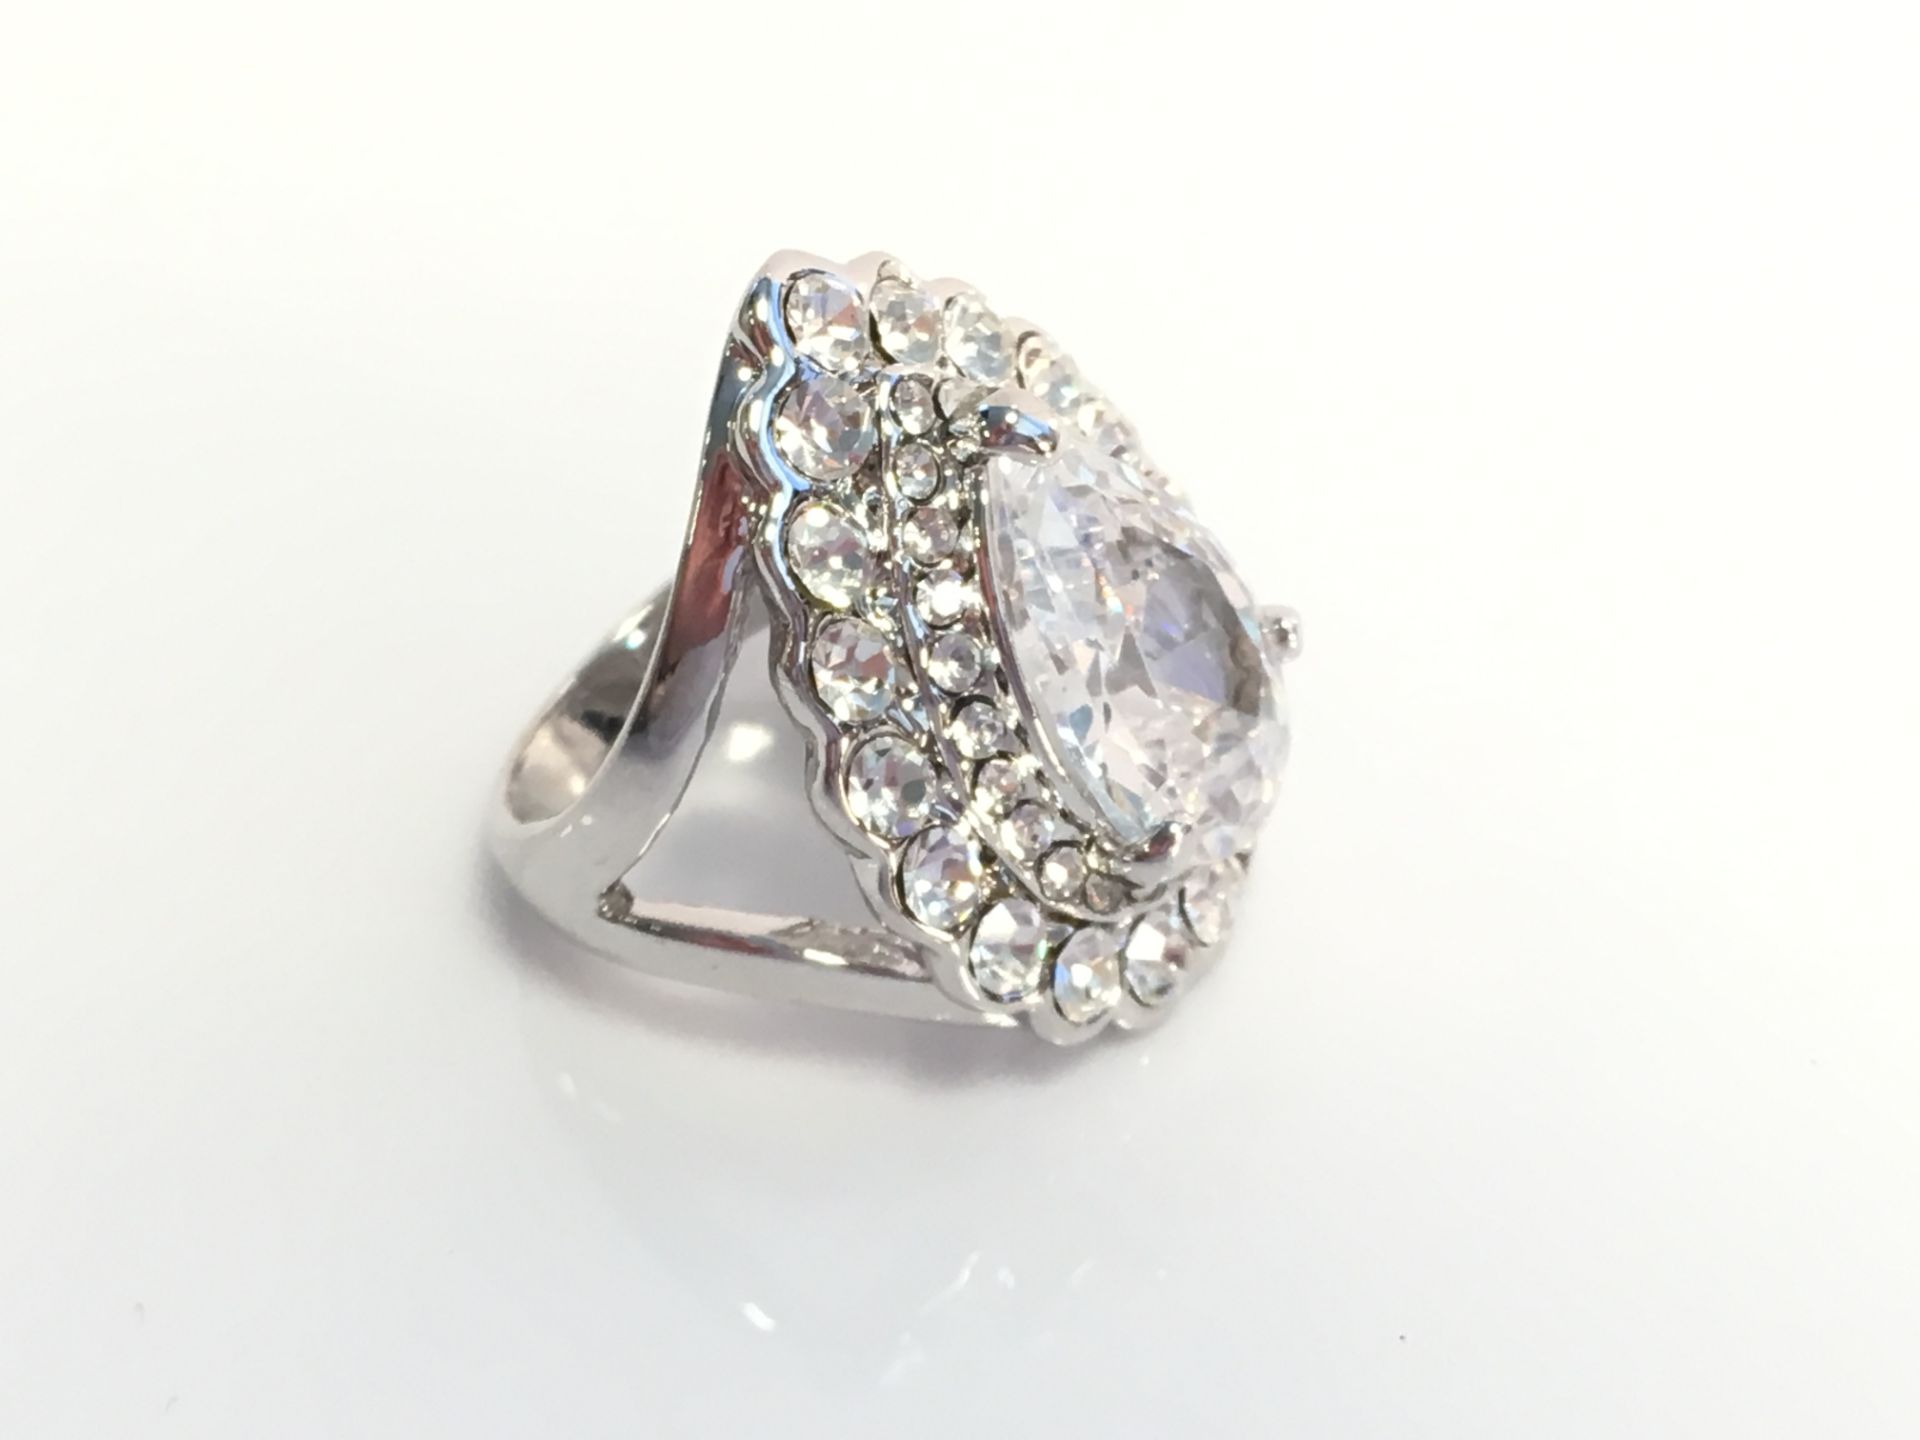 Brand New Pear Shape Simulated Silver Swarovski Elements Cocktail Ring - Image 2 of 3